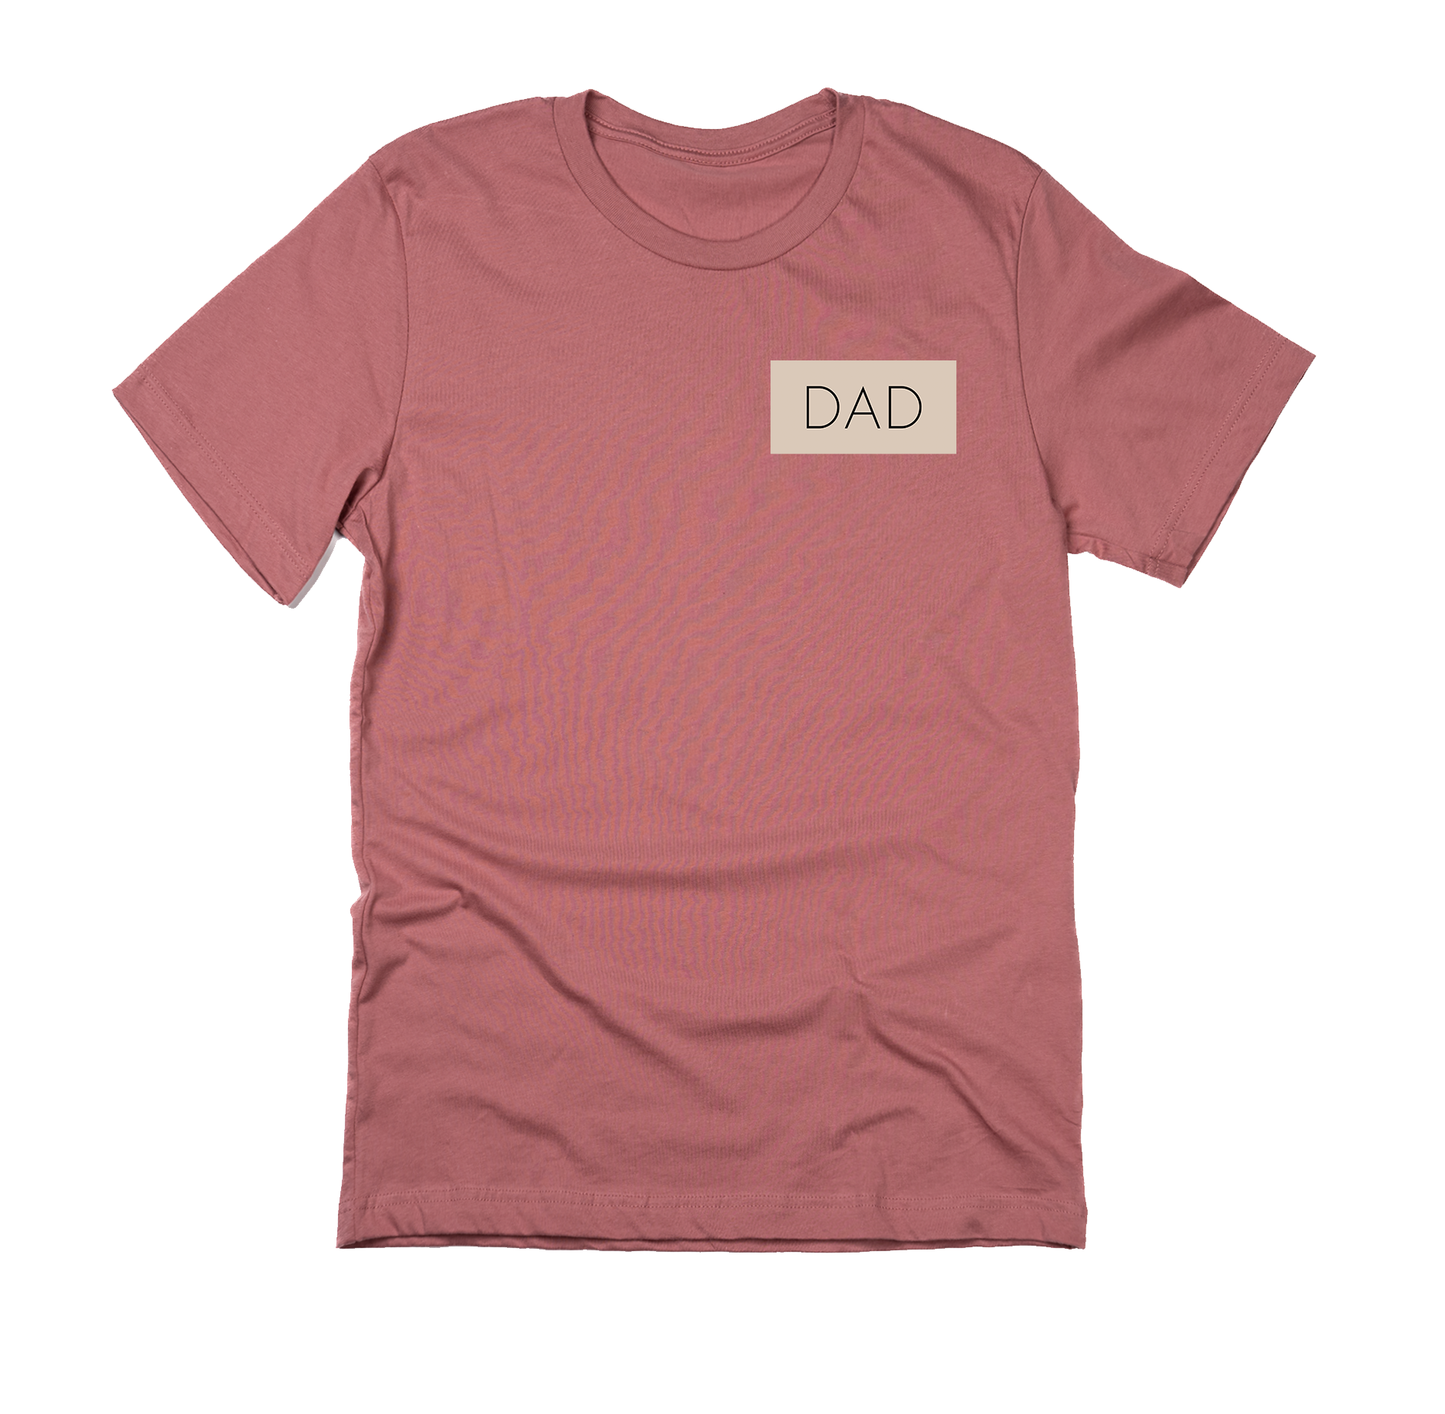 Dad (Boxed Collection, Pocket, Stone Box/Black Text) - Tee (Mauve)